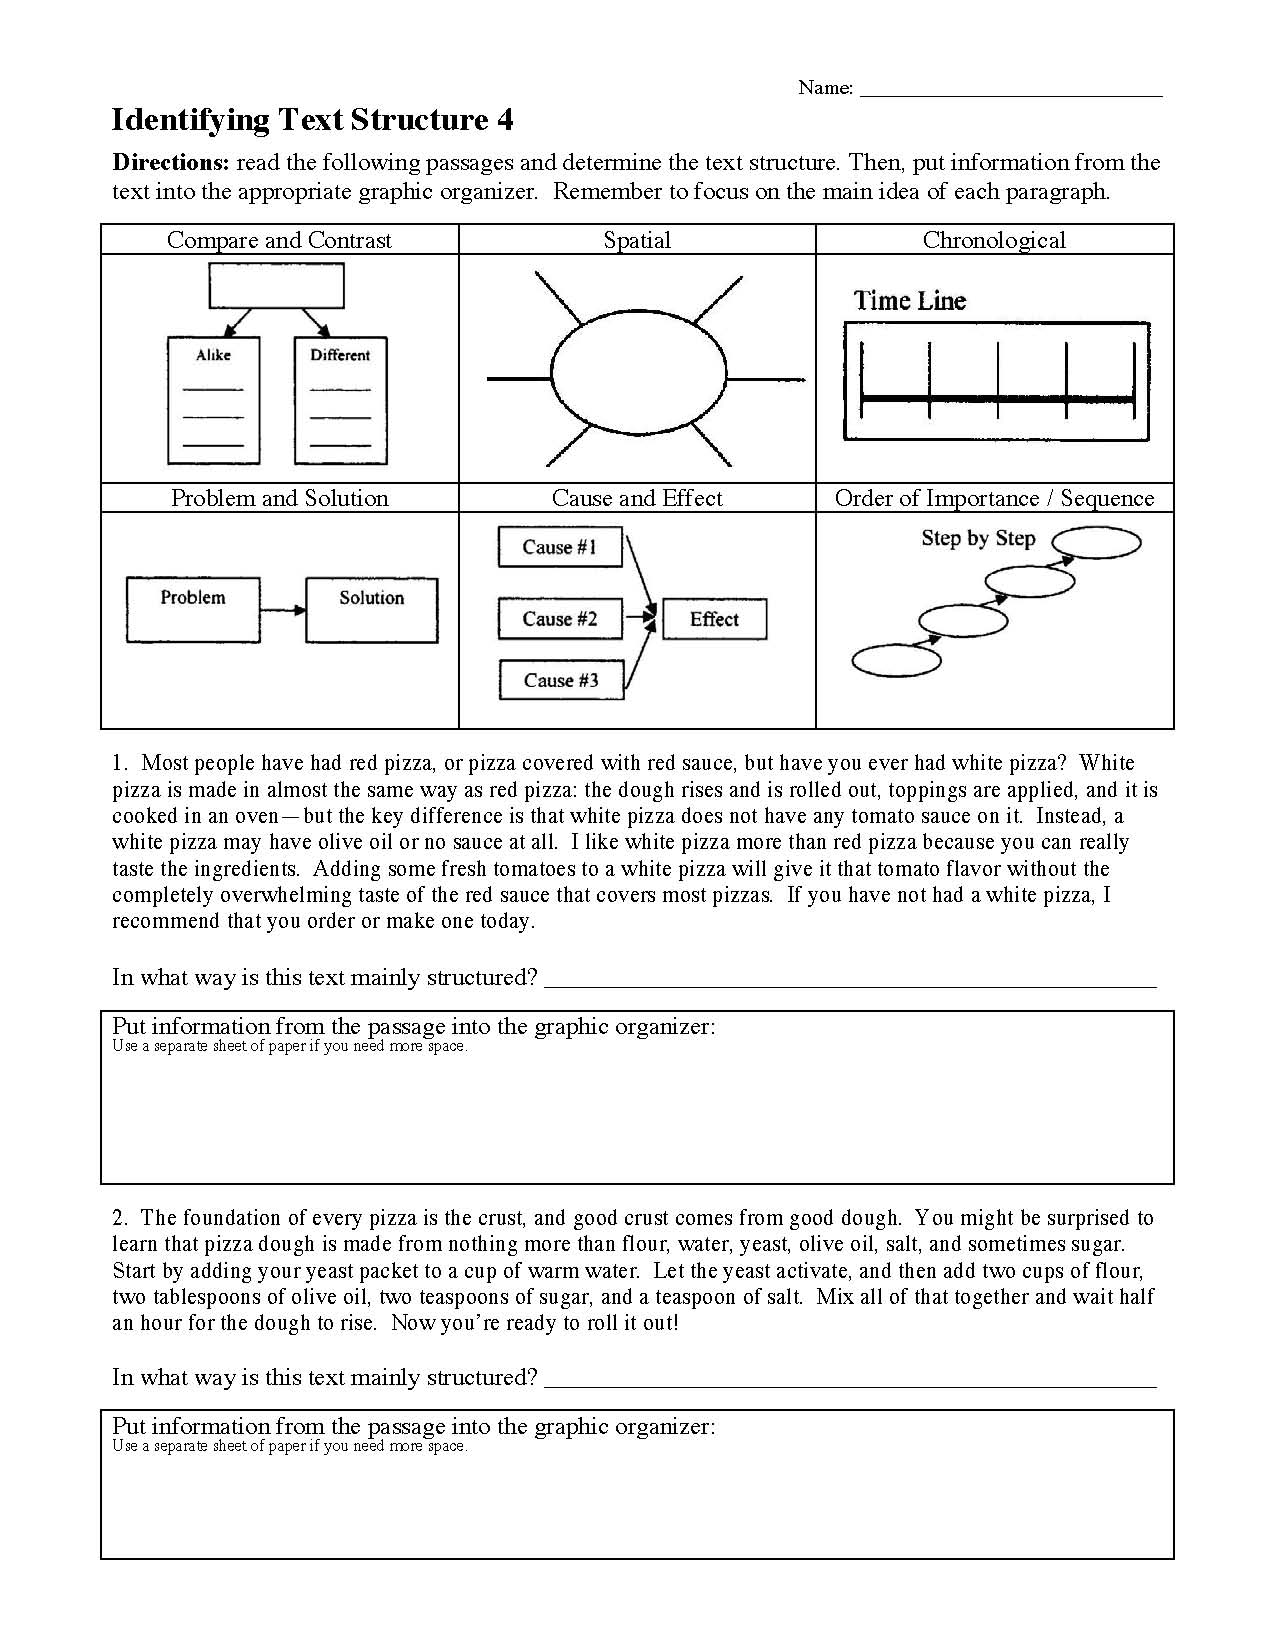 This is a preview image of the Text Structure Worksheet 4.